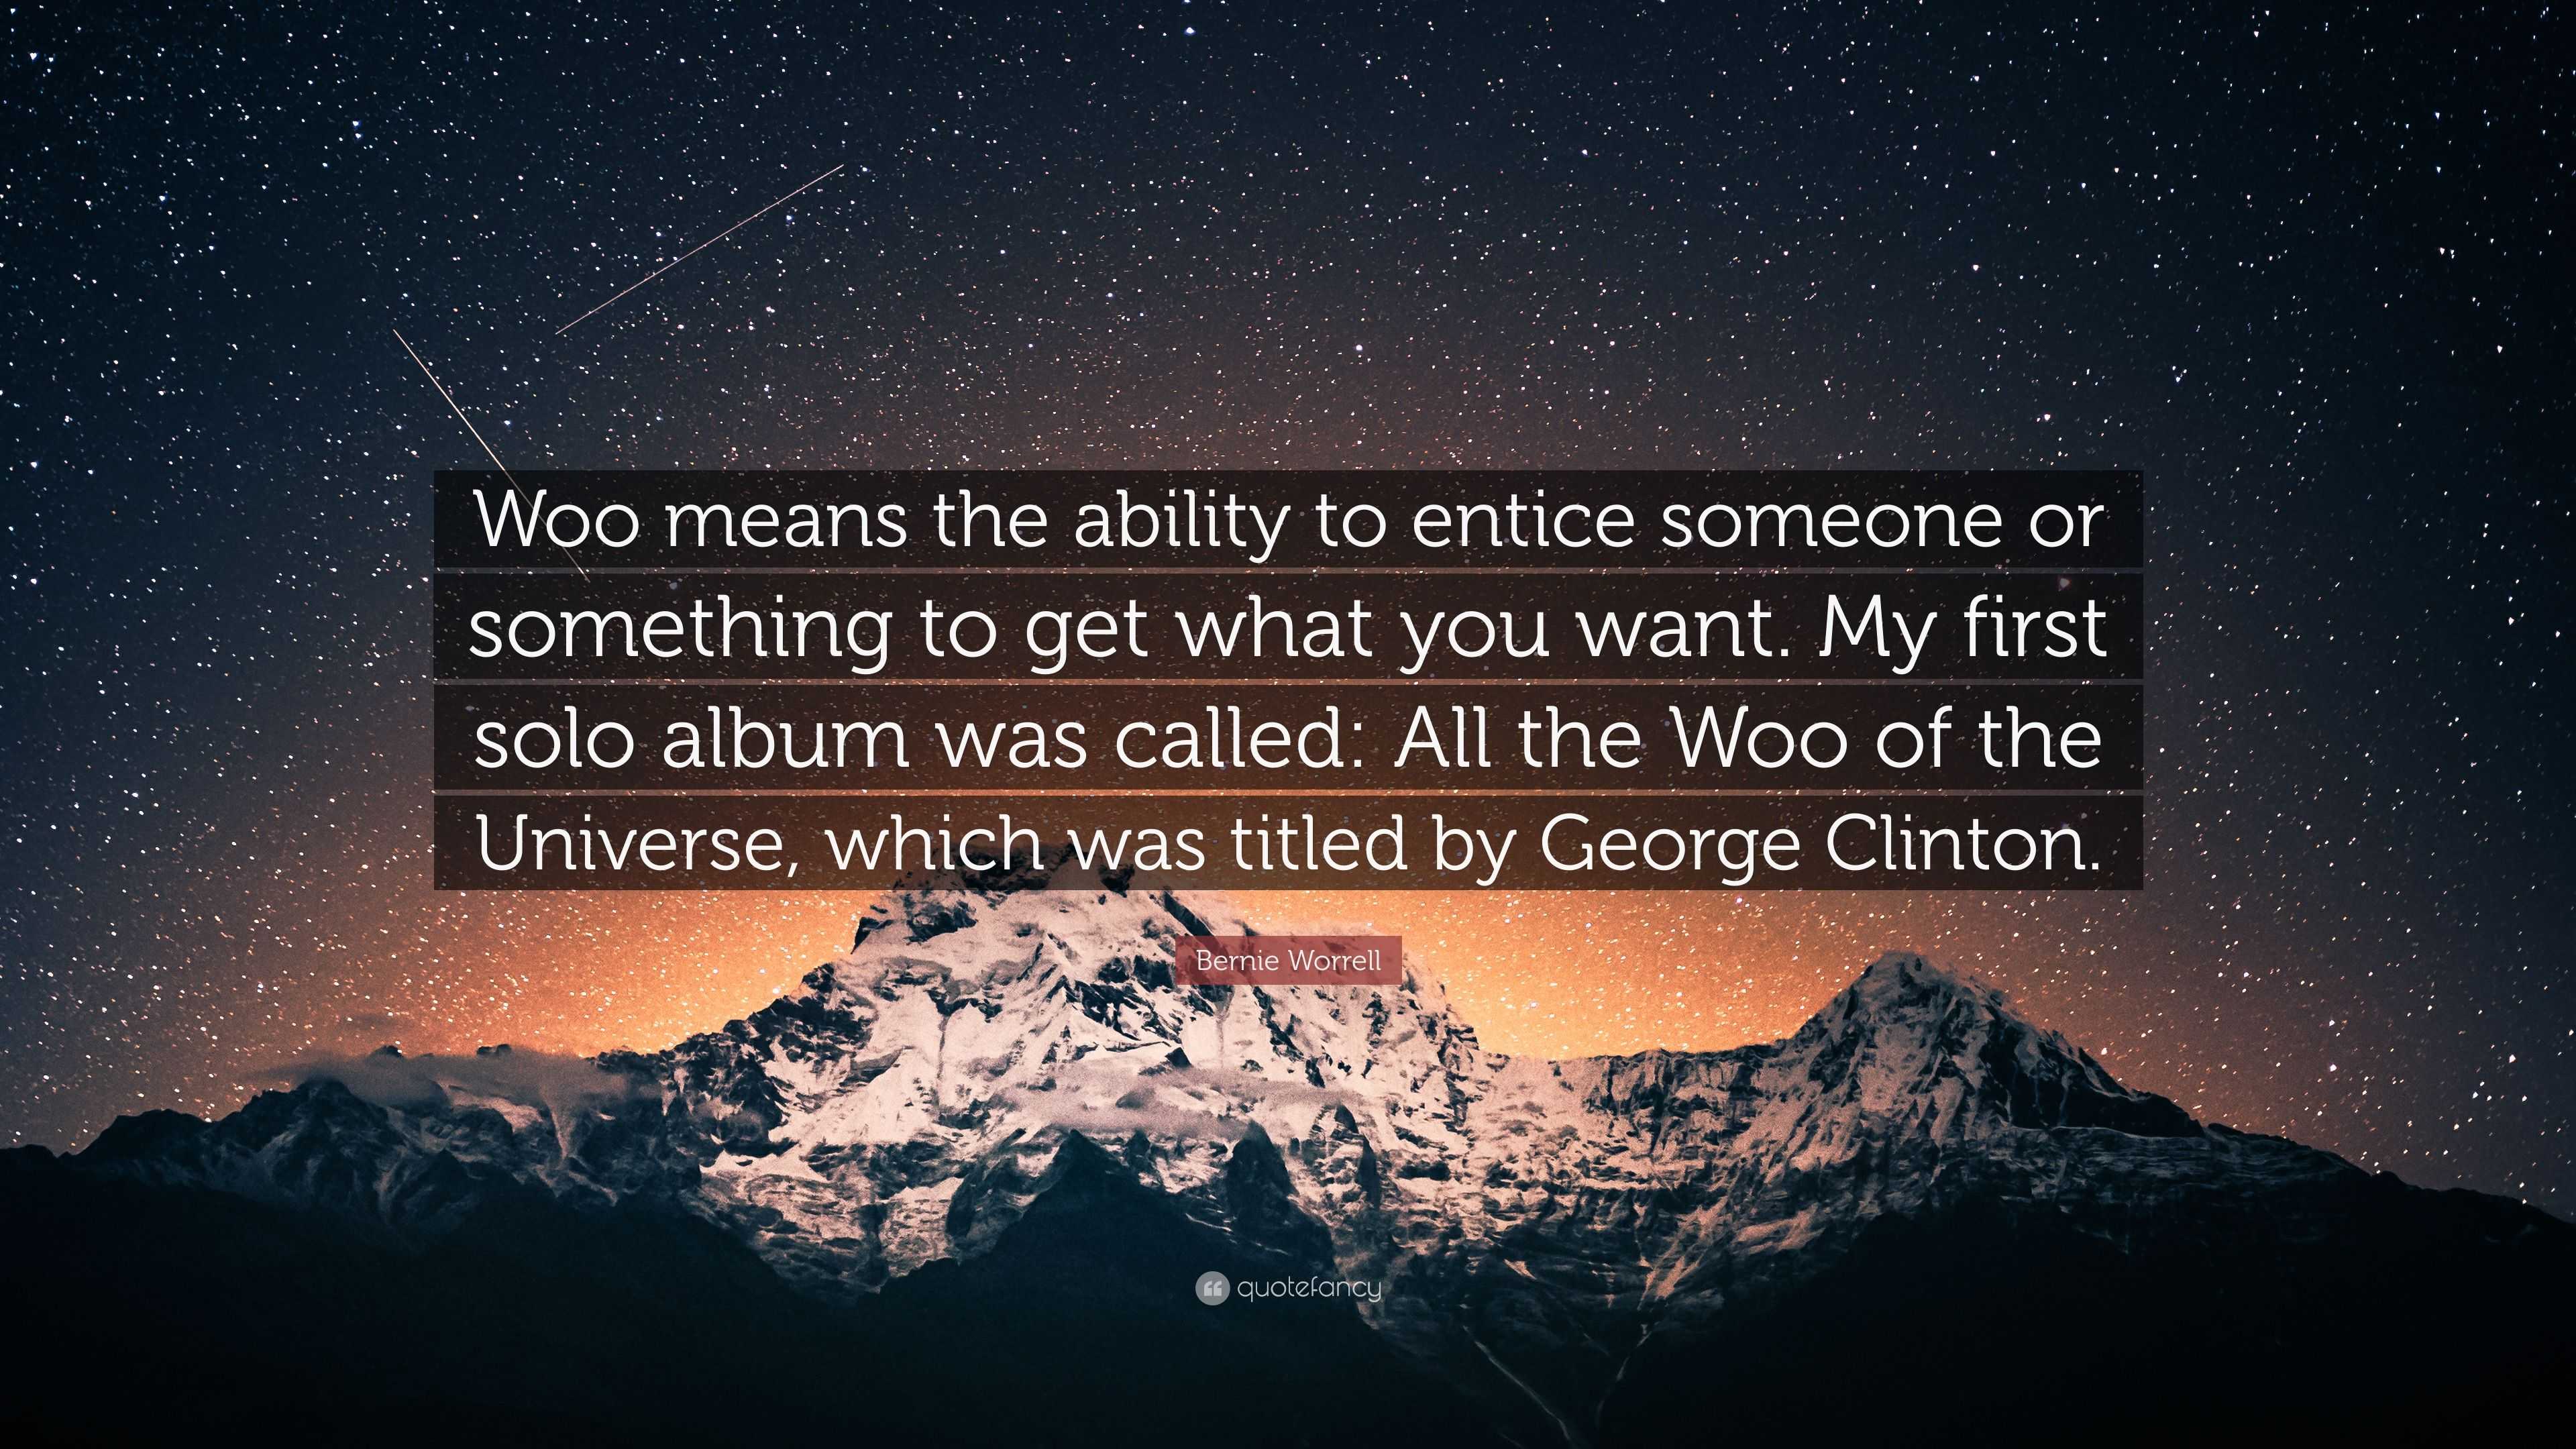 Bernie Worrell Quote: “Woo means the ability to entice someone or